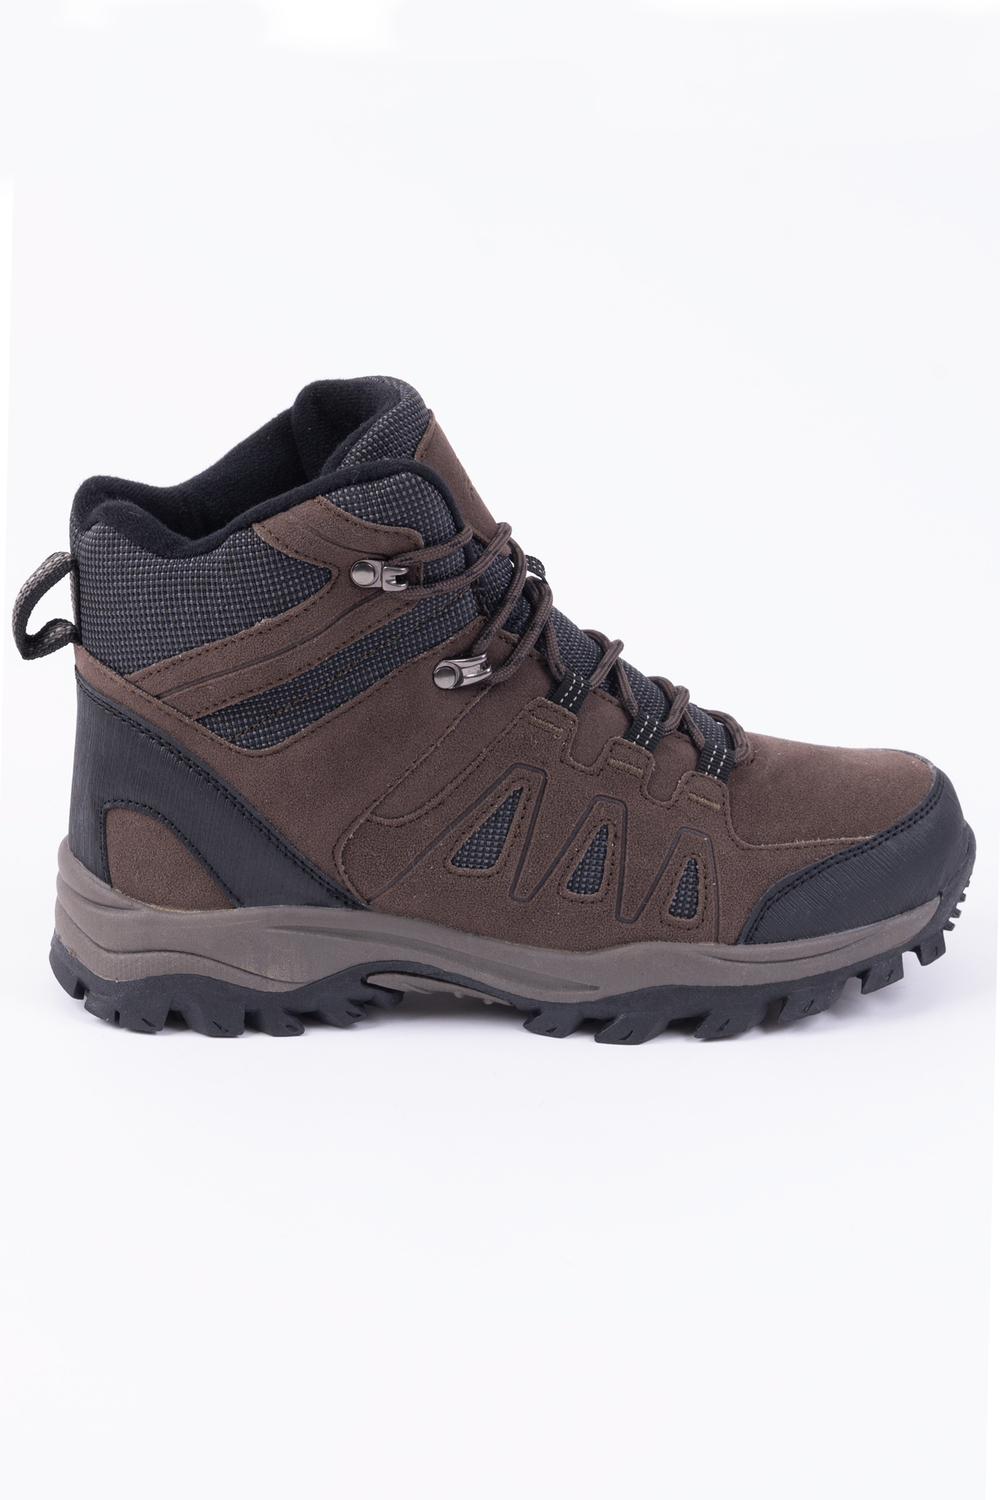 Men's insulated water resistant hiking winter snow boot